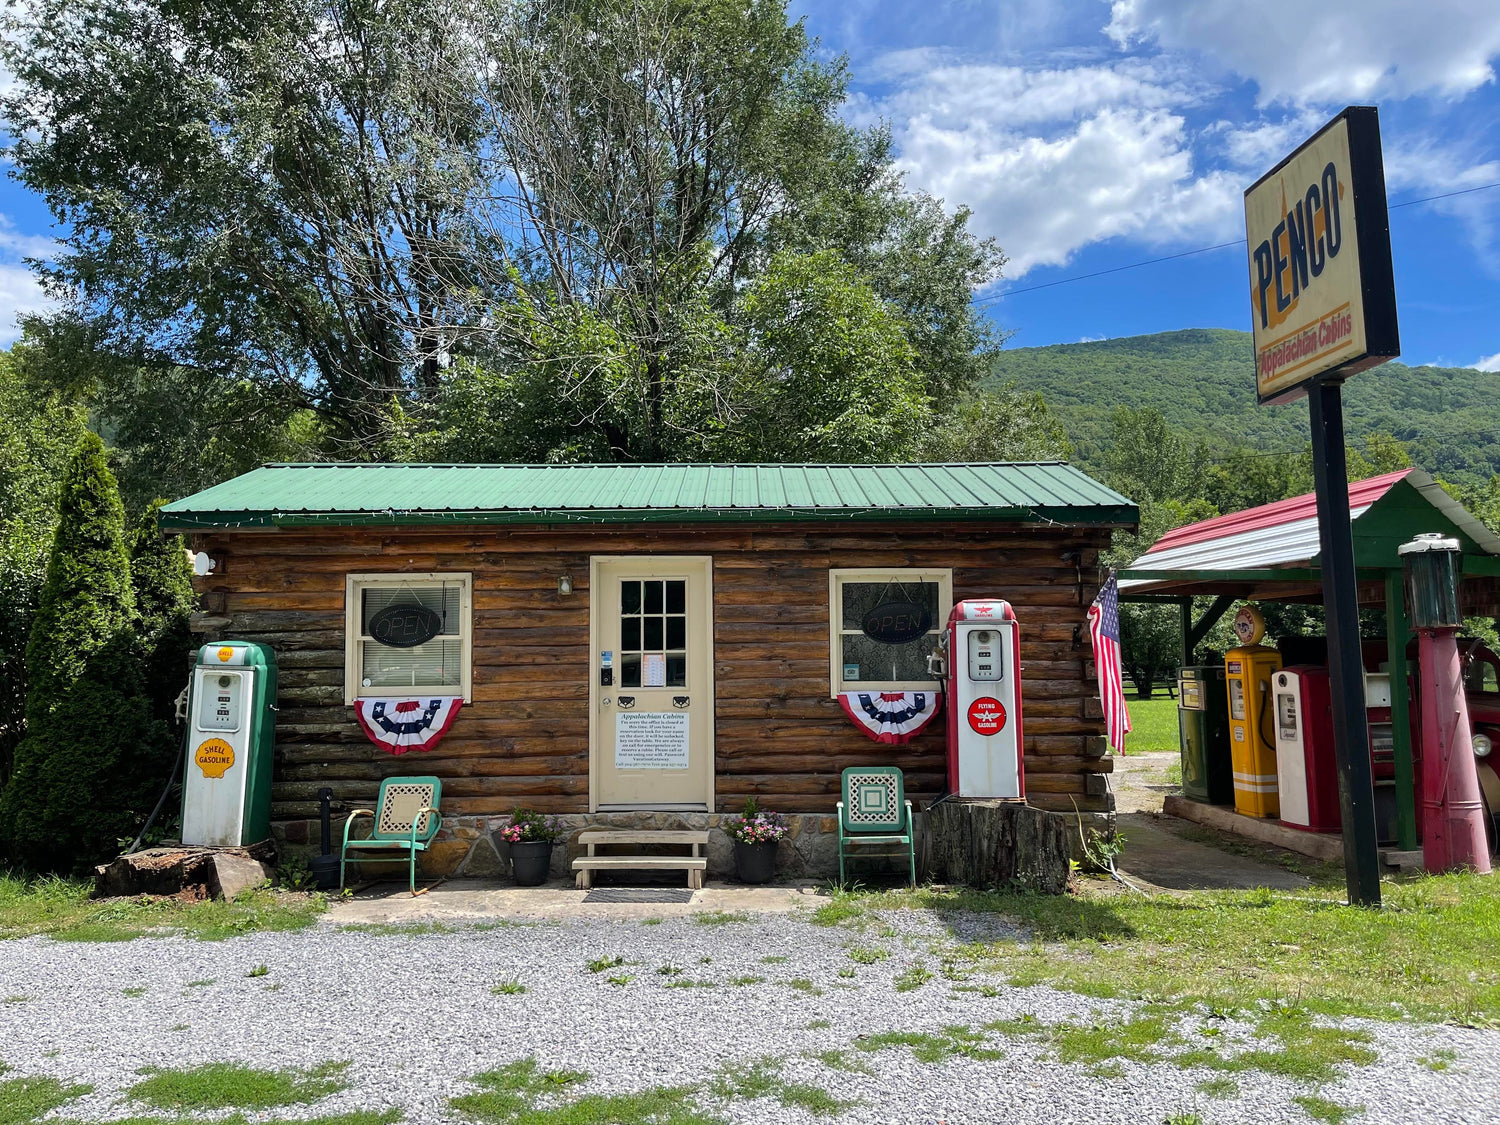 Appalachian Cabins Seneca Rocks WV Check in Office Back in Time Antiques Noticed by American Pickers Old Gas Pumps, Gas Station Memorabilia Rustic Log Cabins Lodging Vacation Rentals Cabins near Seneca Rocks Smoke Hole Caverns Dolly Sods & Ski Resorts